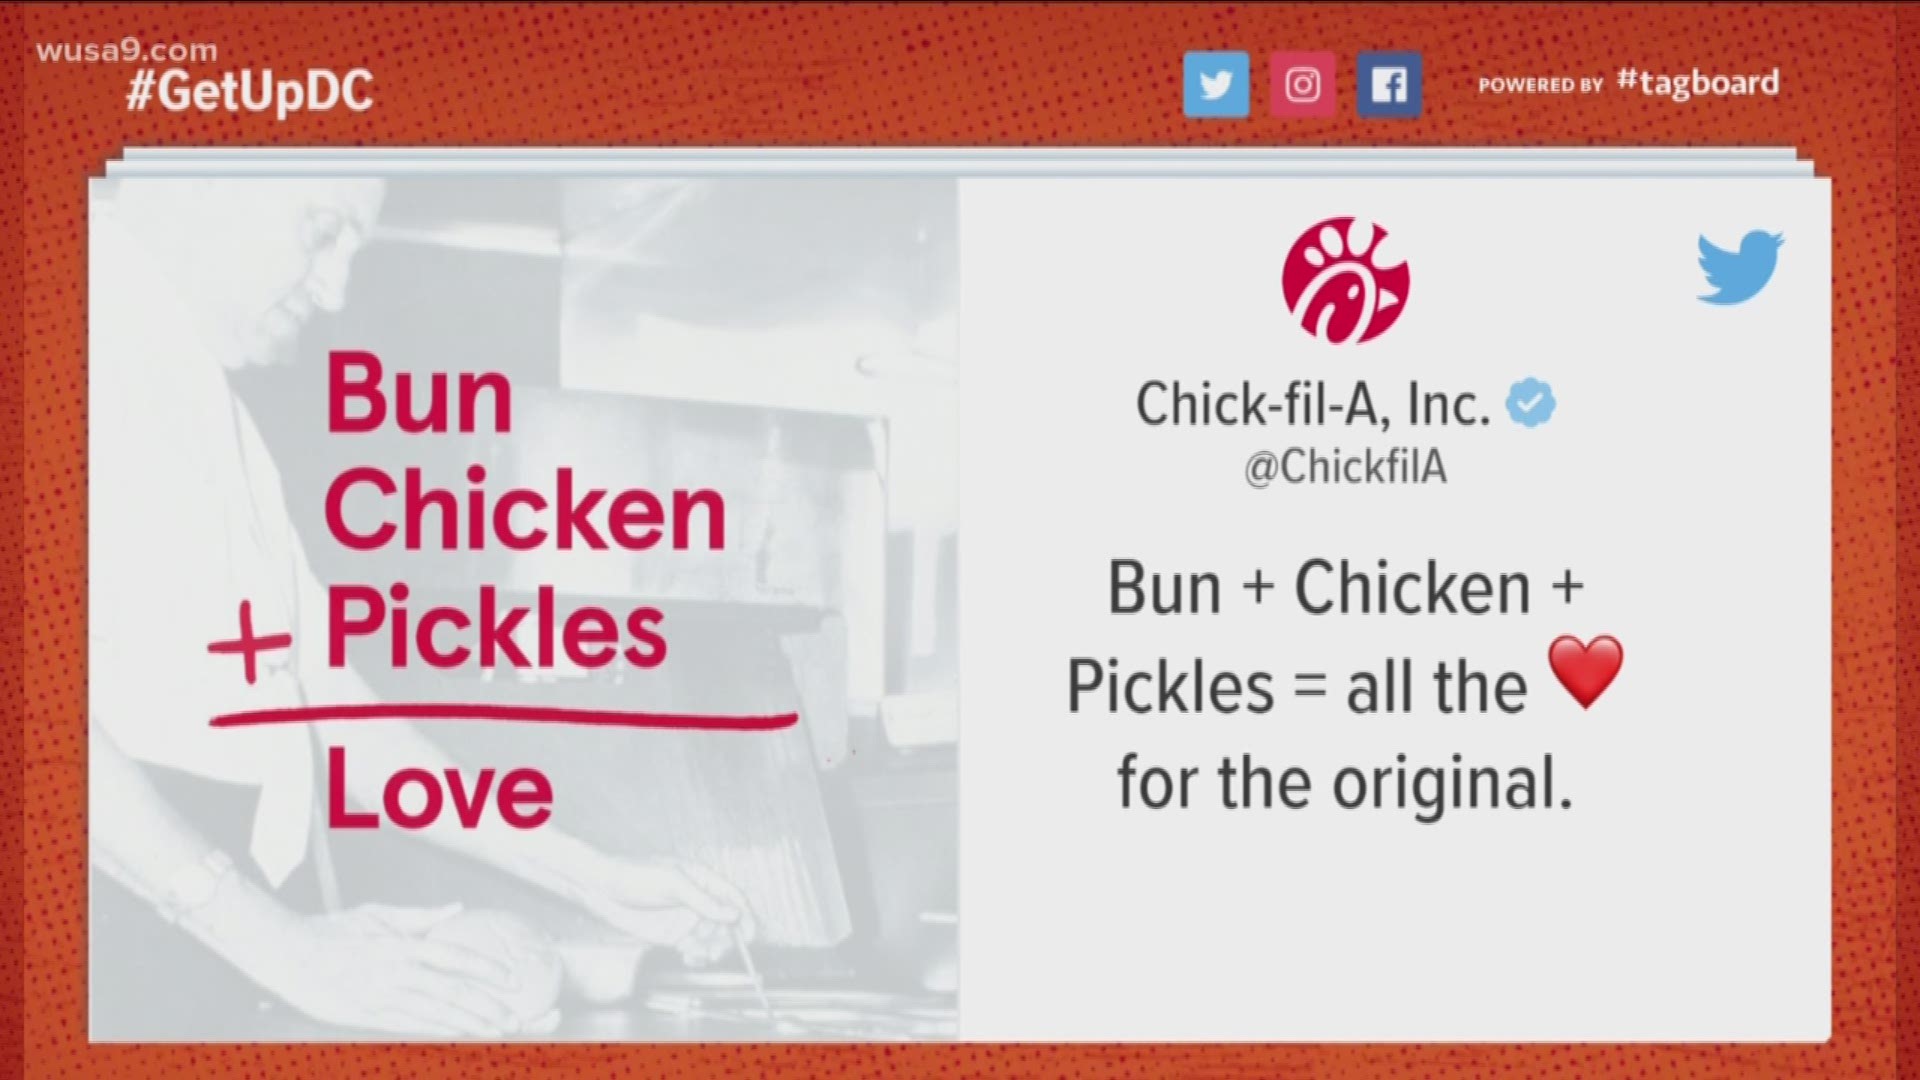 Which chicken sandwich is better? Chick-fil-a or Popeyes.